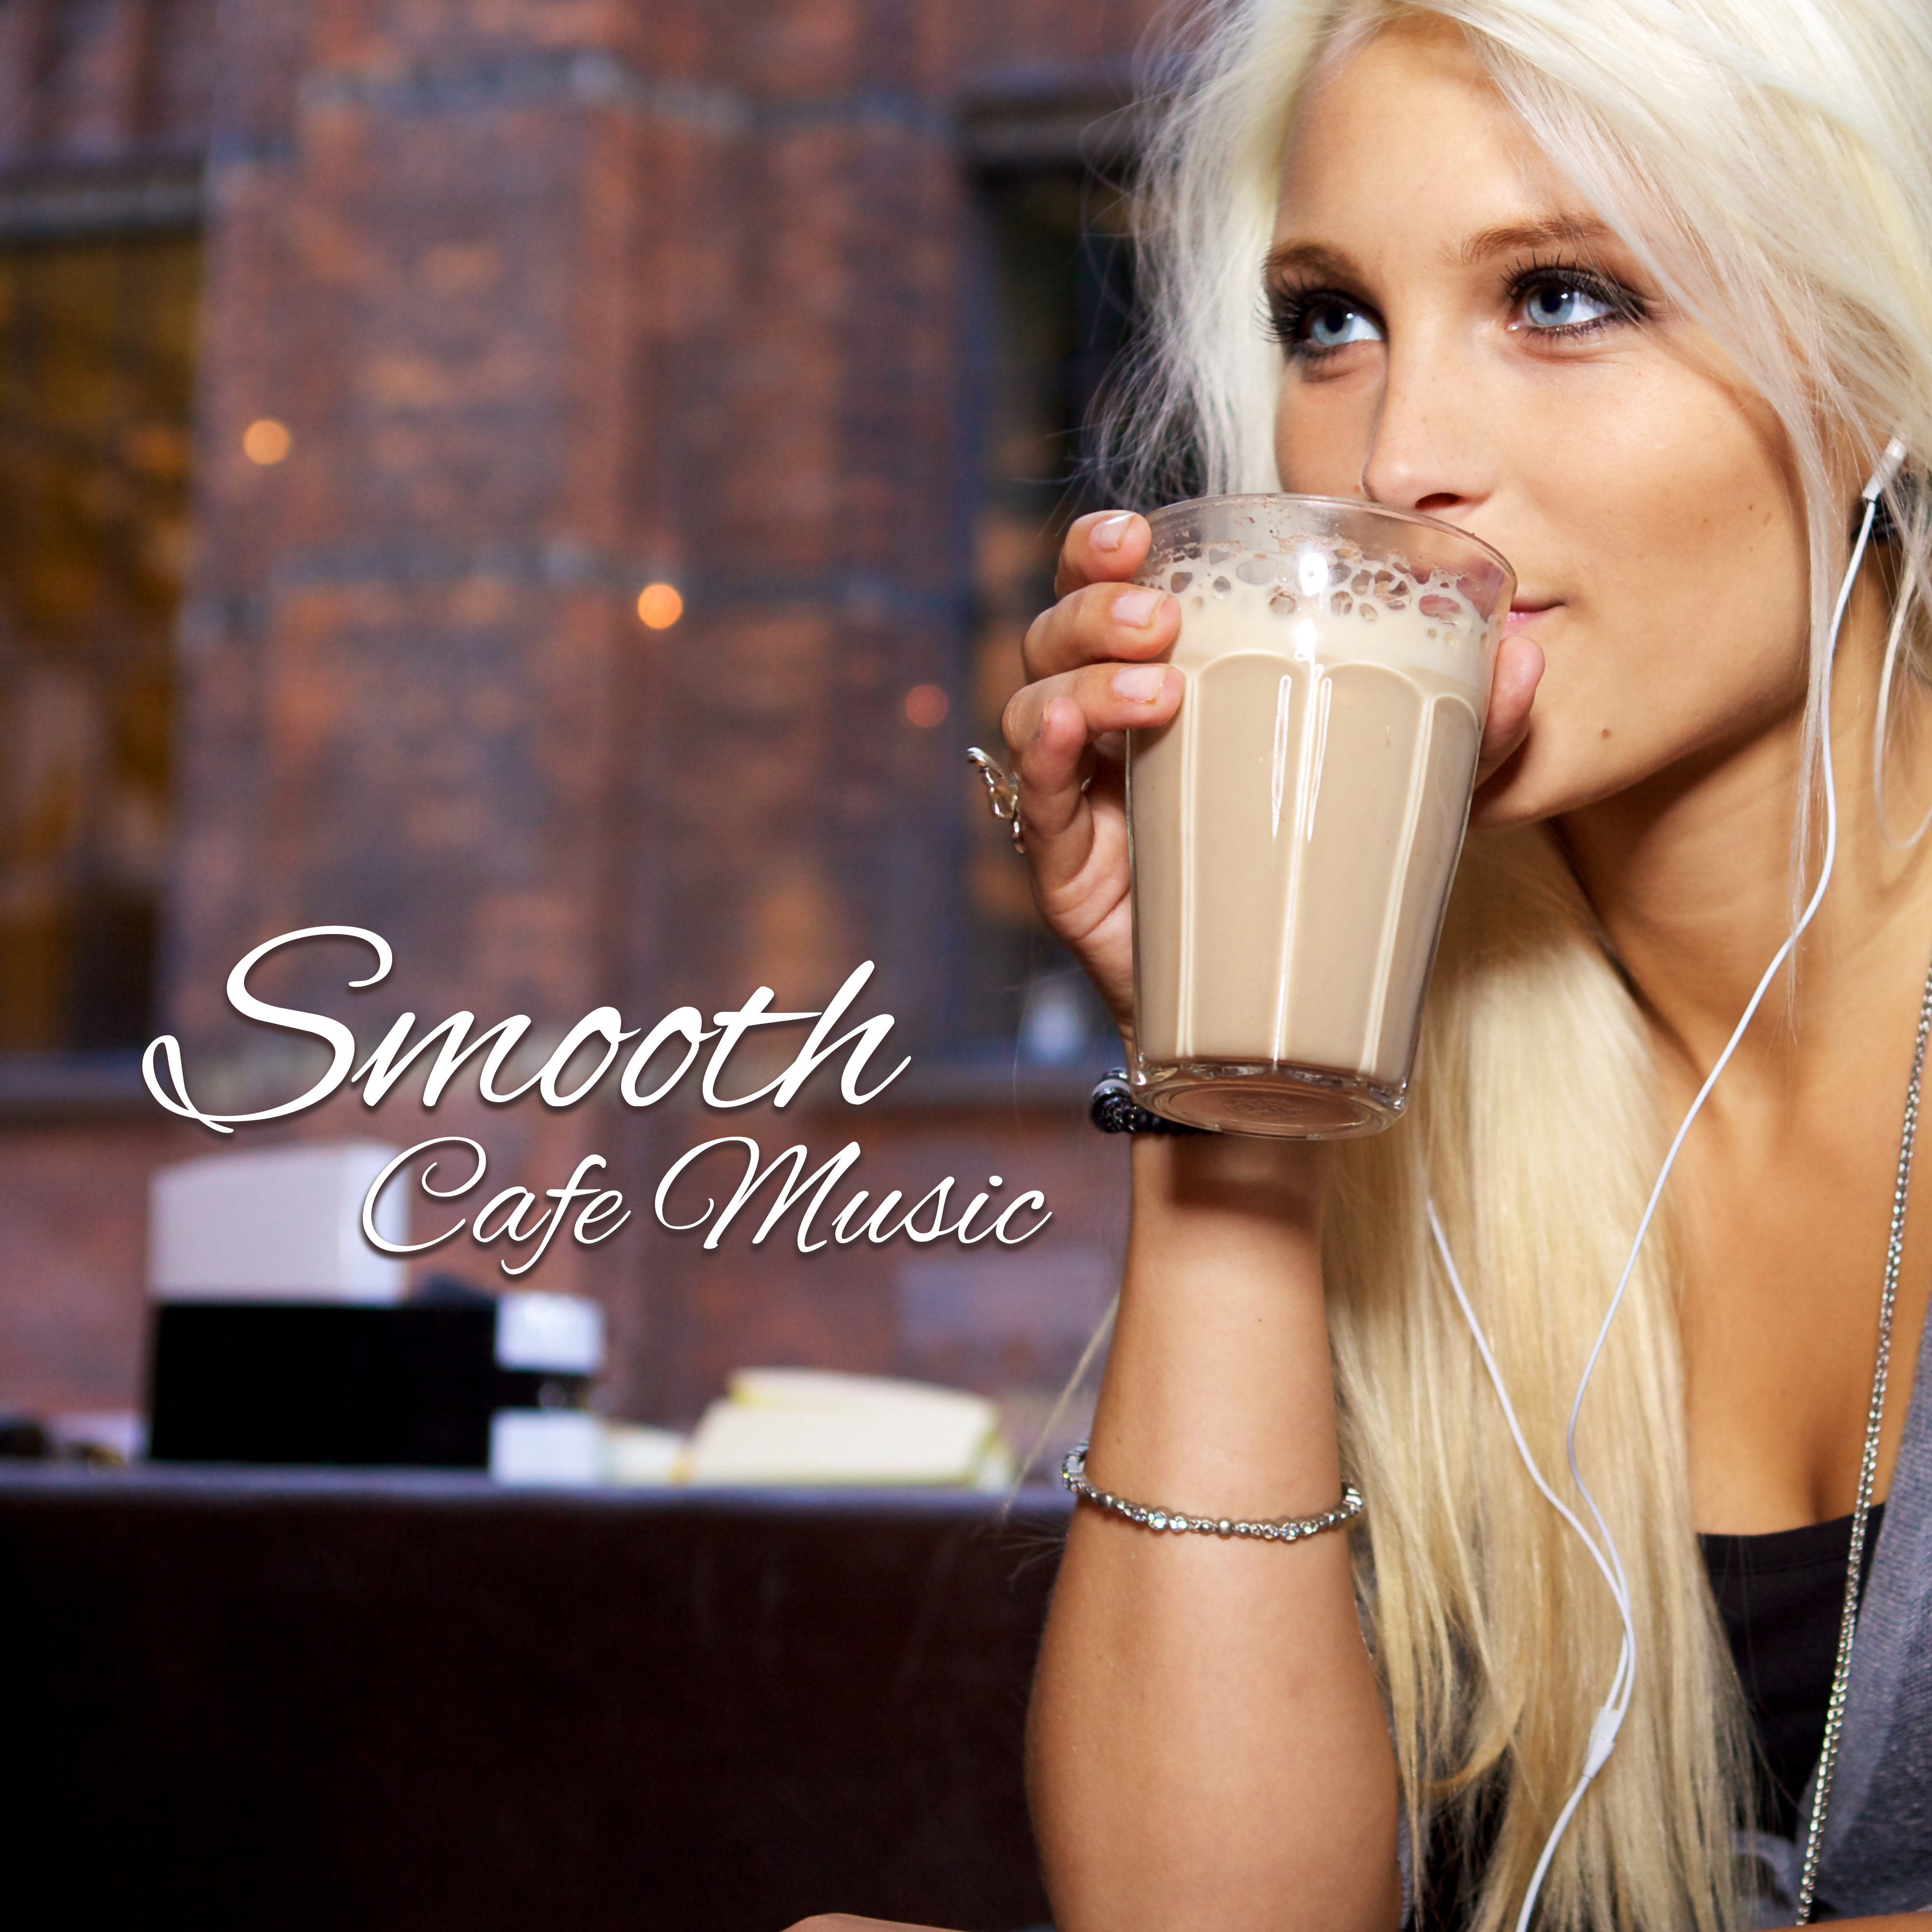 Smooth Cafe Music